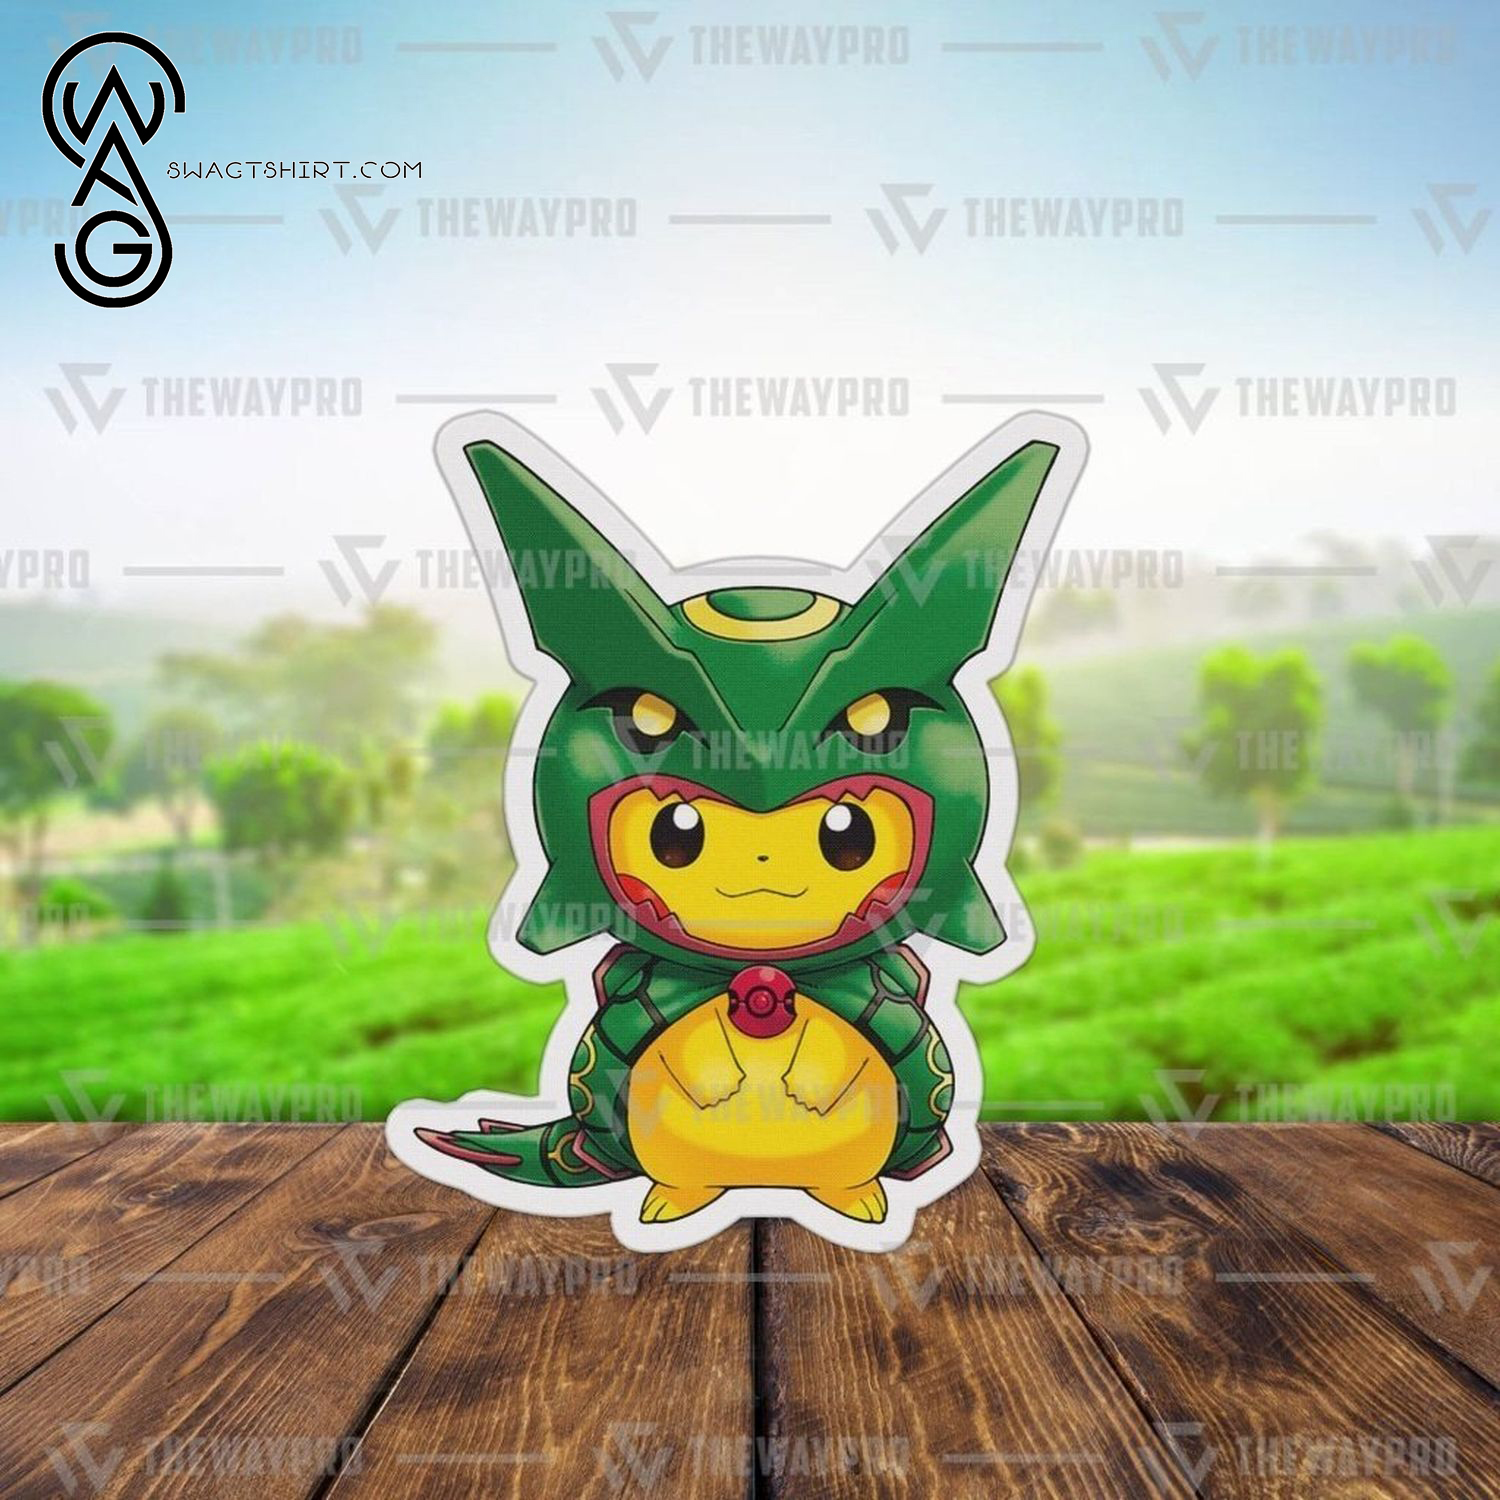 Best selling products] Anime Pokemon Pikachu Rayquaza Custom Shaped Pillow